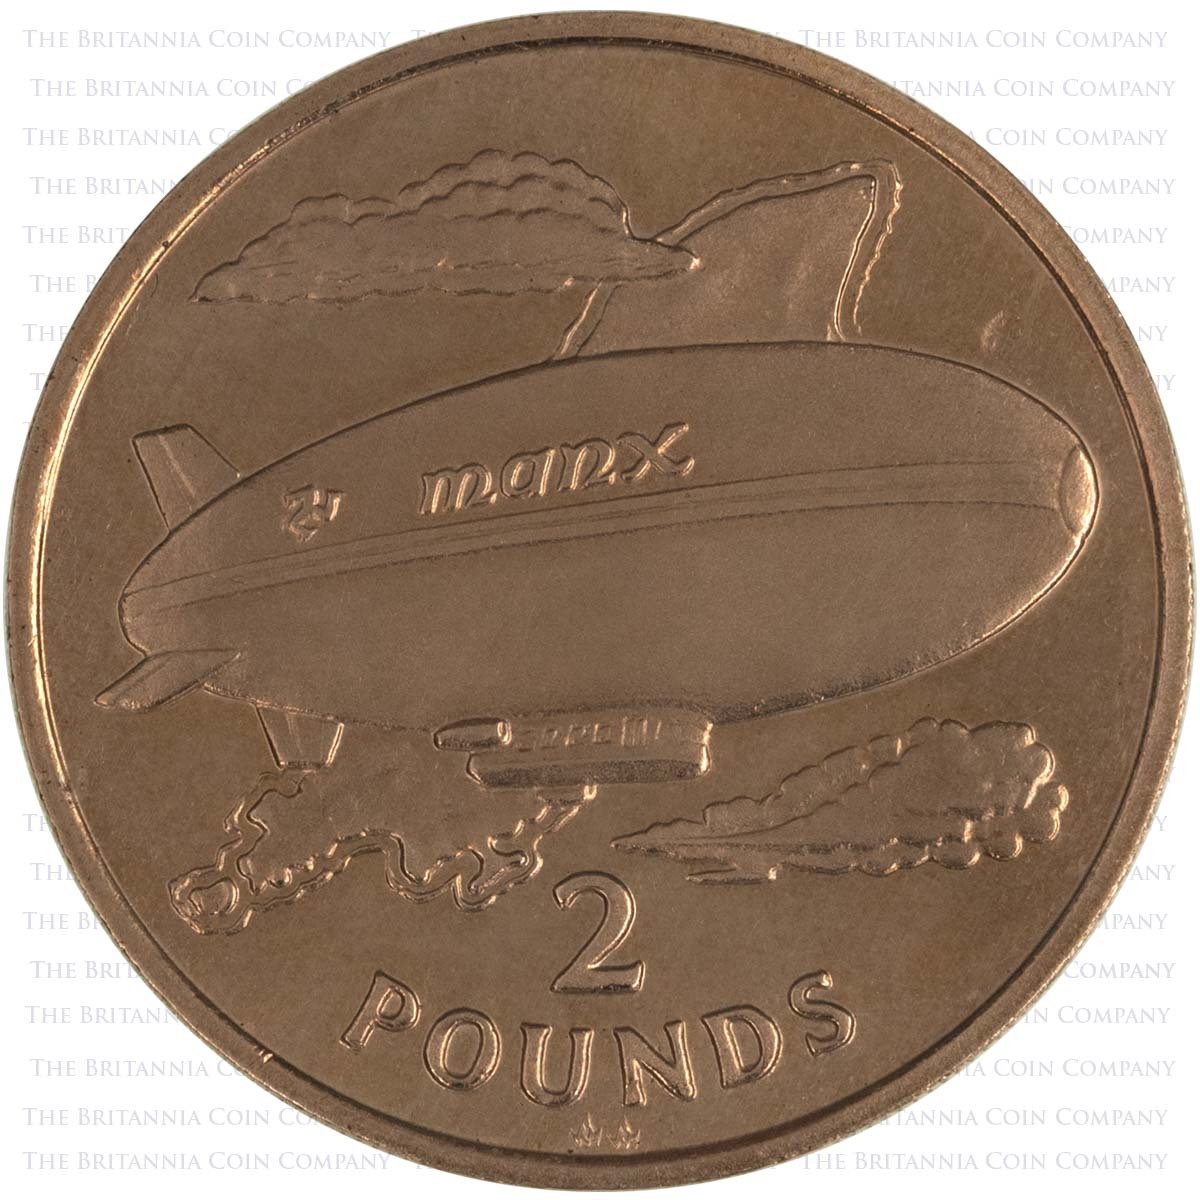 1989 Isle Of Man Blimp Circulated Two Pound Coin Reverse